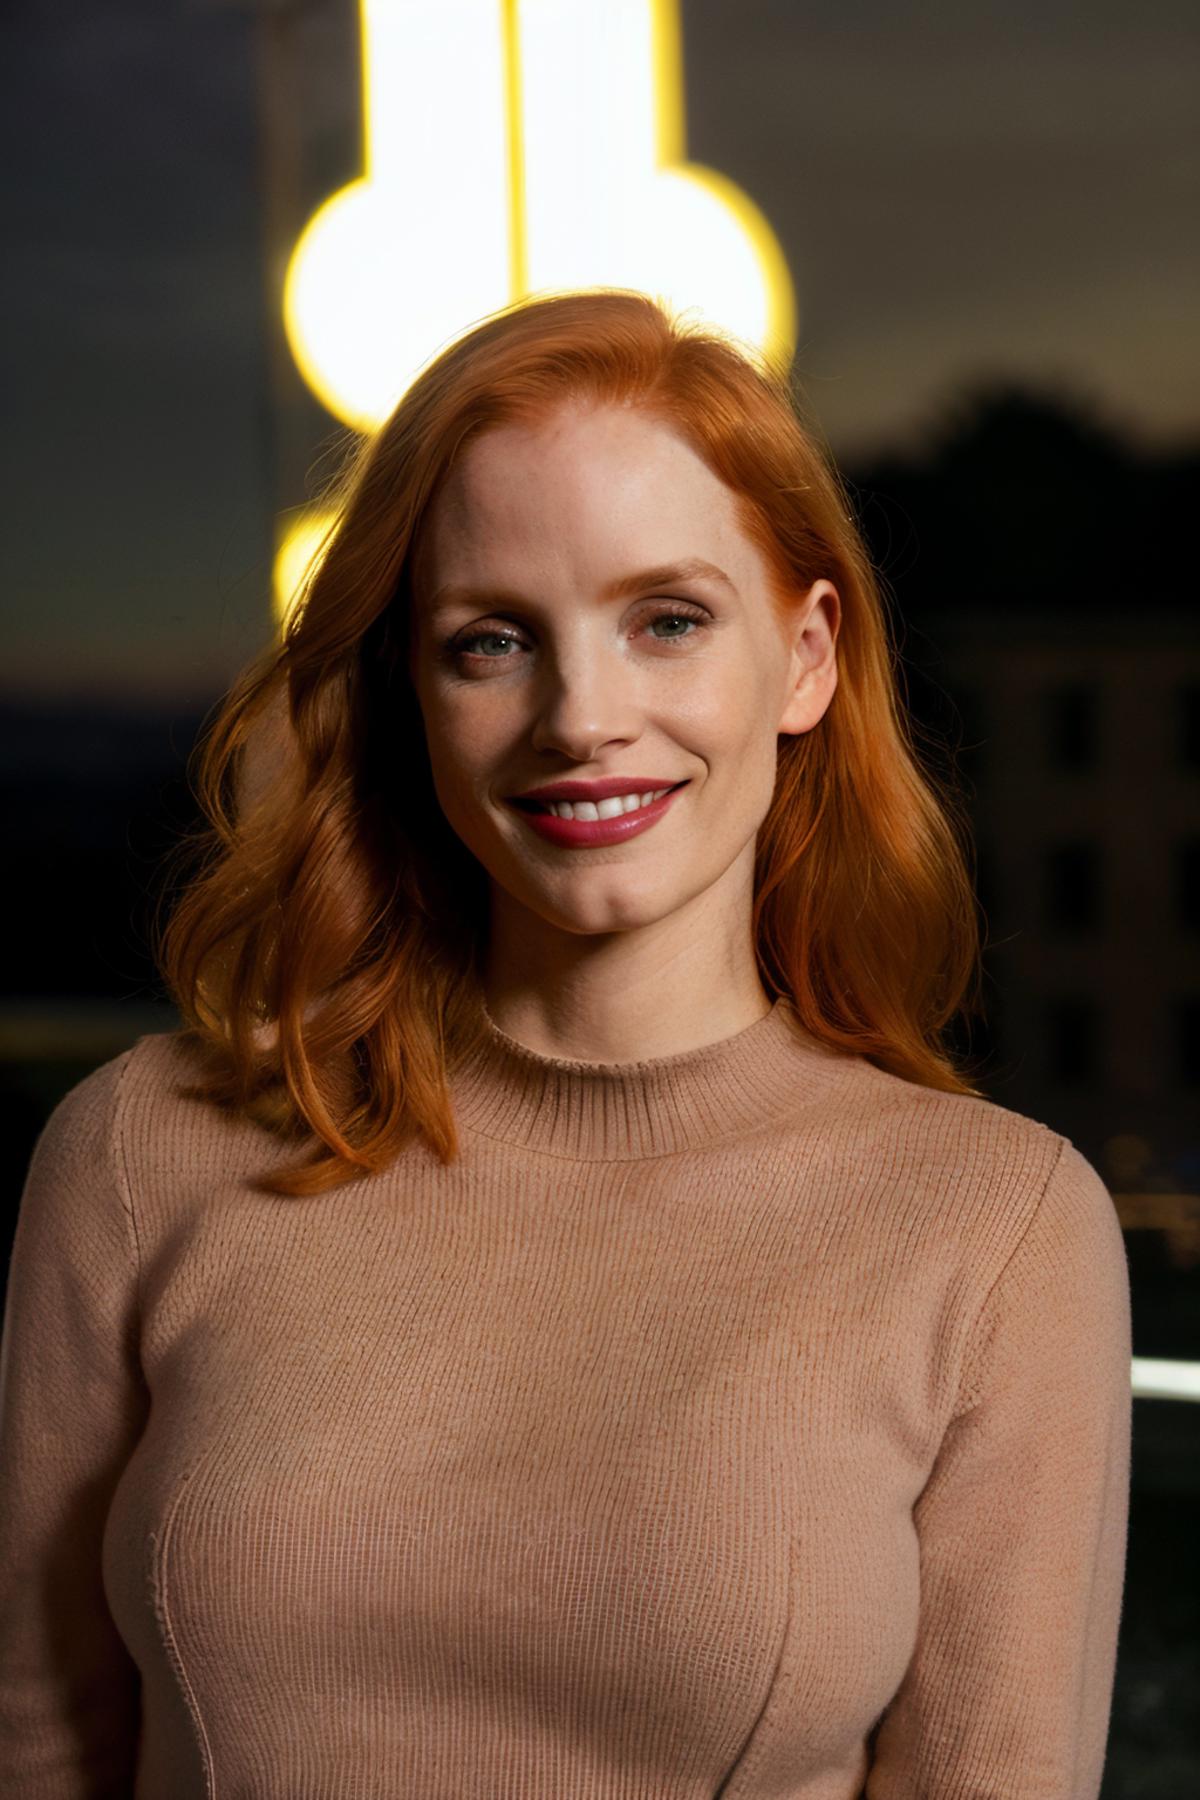 Jessica Chastain image by damocles_aaa